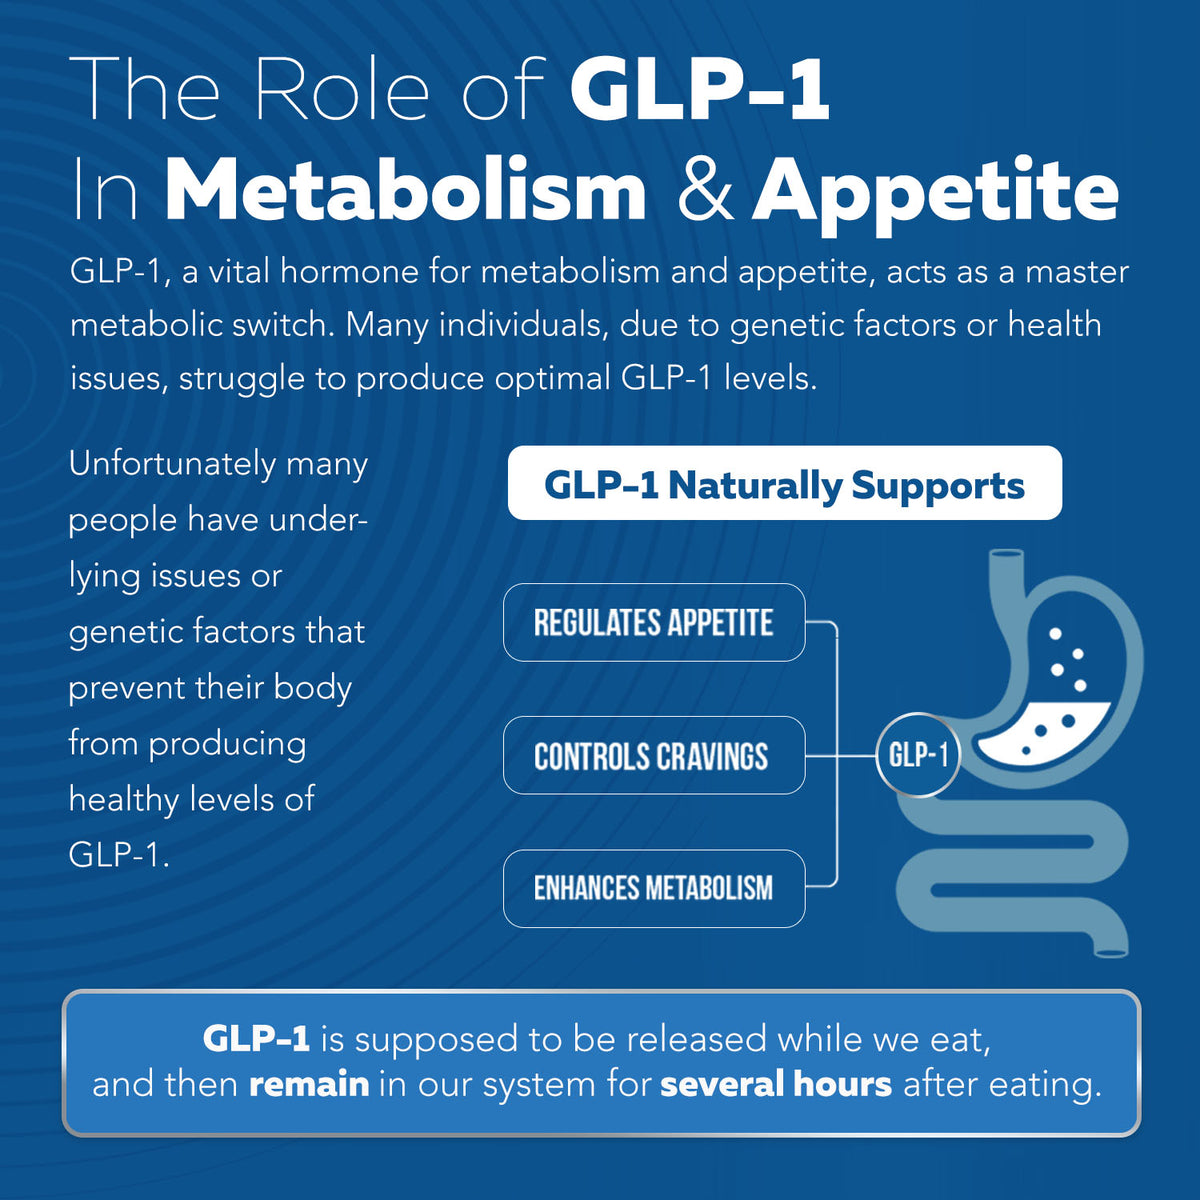 GLP-Activate: Natural GLP-1 Support*